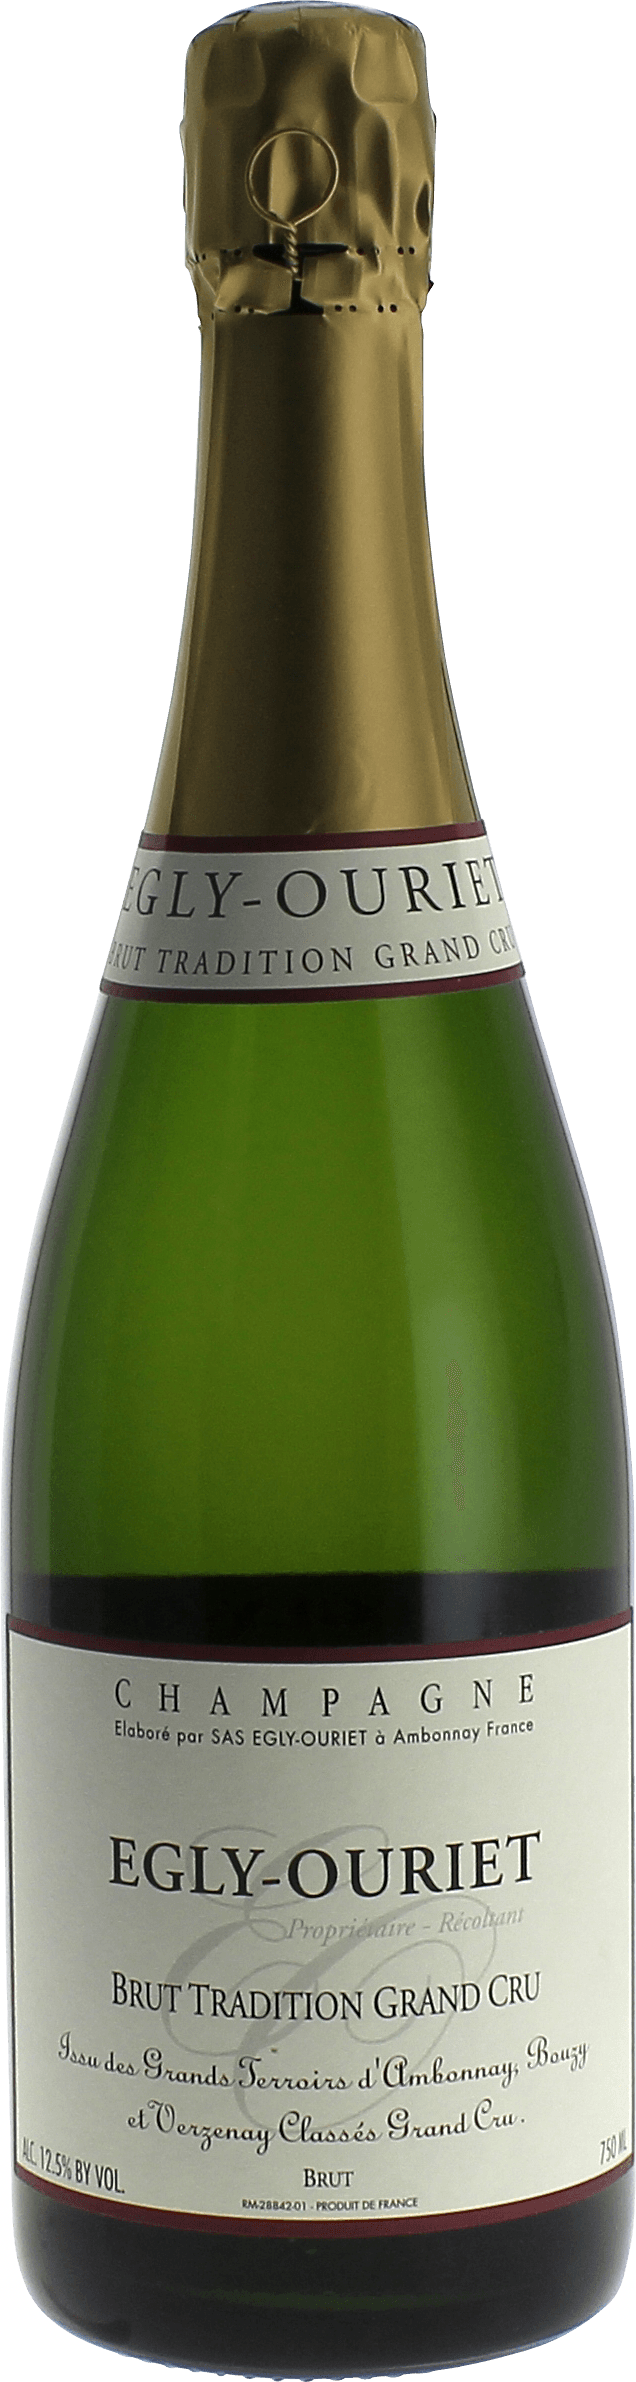 Egly-ouriet brut tradition grand cru  Egly Ouriet, Champagne